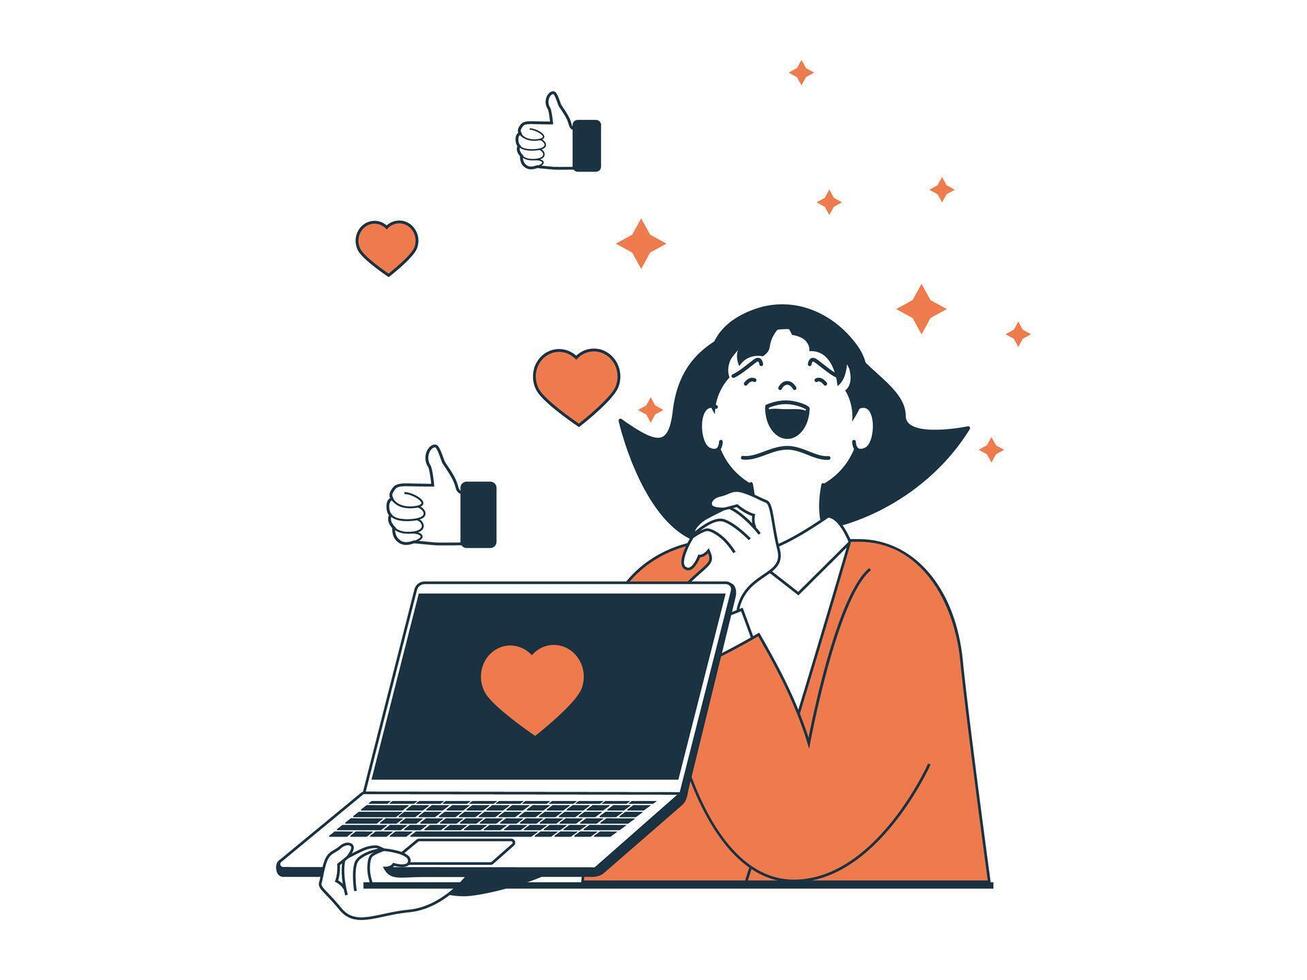 Internet addiction concept with character situation. Excited woman has networking unhealthy habit, getting likes and comments on her post. Vector illustration with people scene in flat design for web